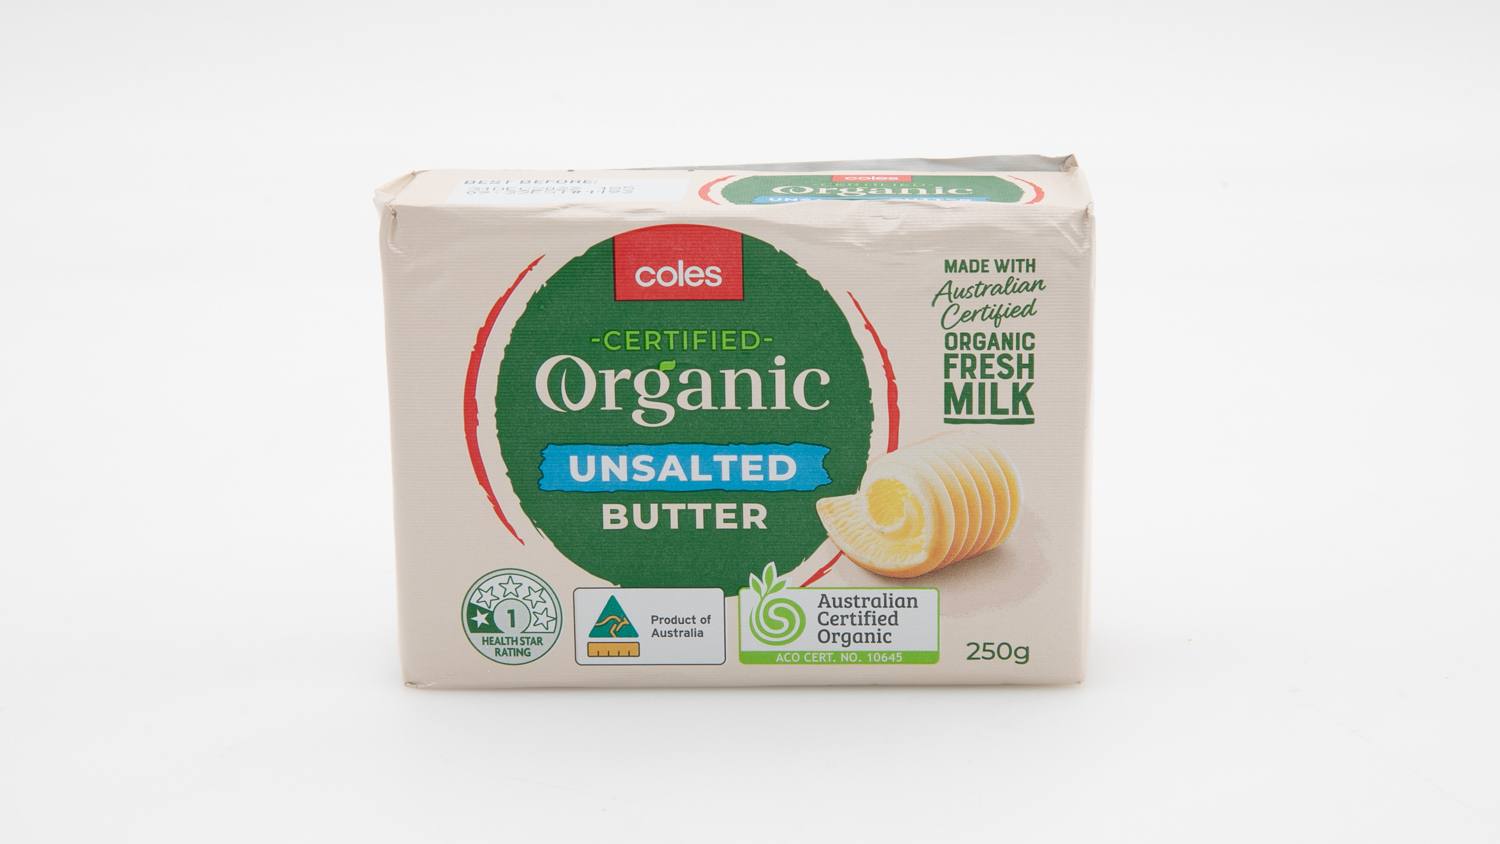 Coles Certified Organic Unsalted Butter carousel image